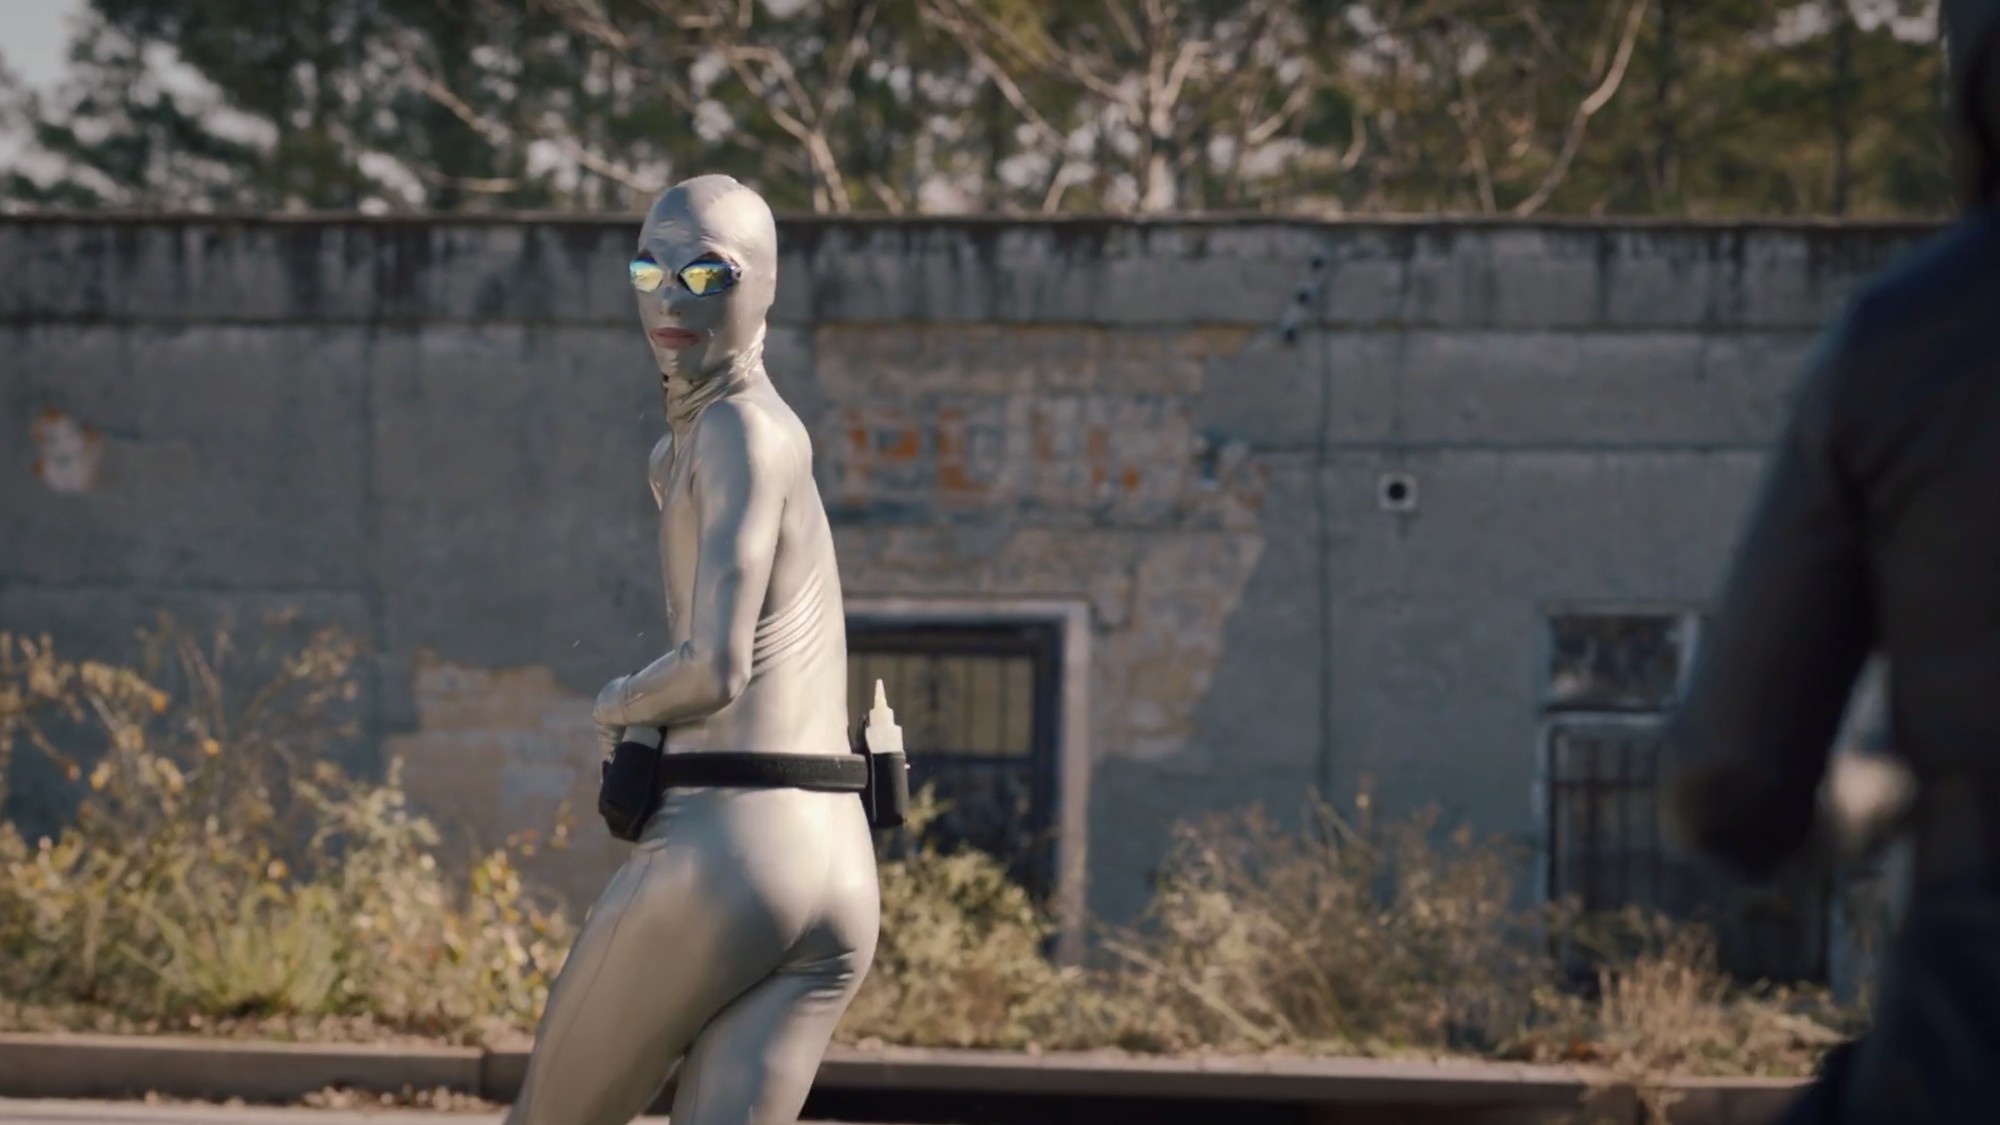 HBO Watchmen's Lube Man wearing Vex Latex Catsuit and Moderne Hood in Silver